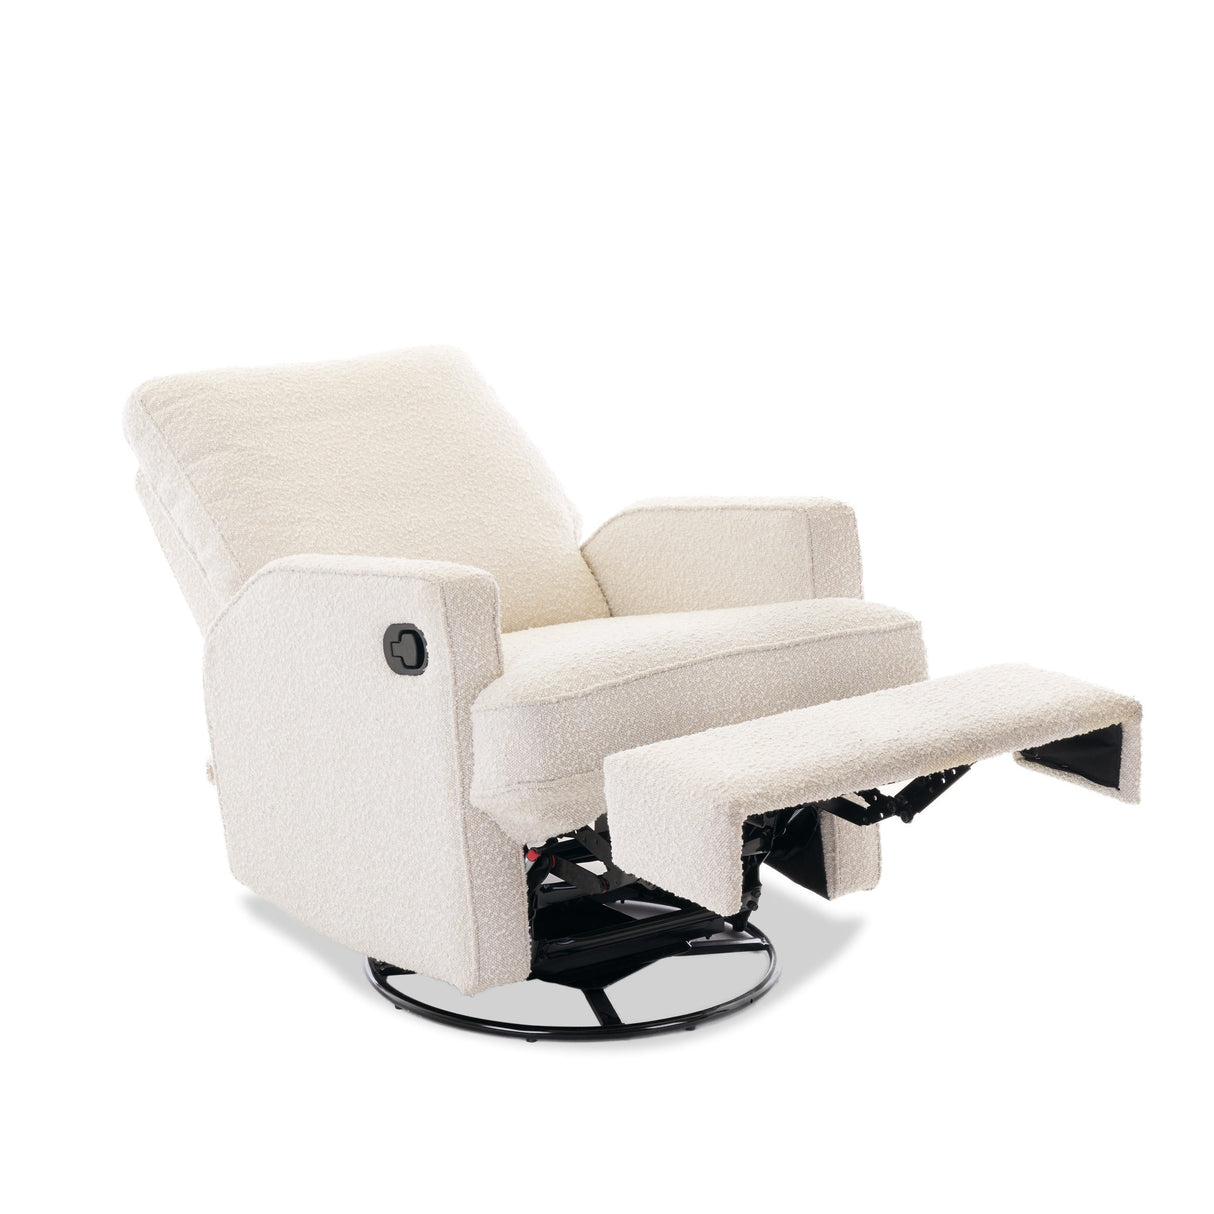 Madison Swivel Glider Recliner Chair - Bouclé Style